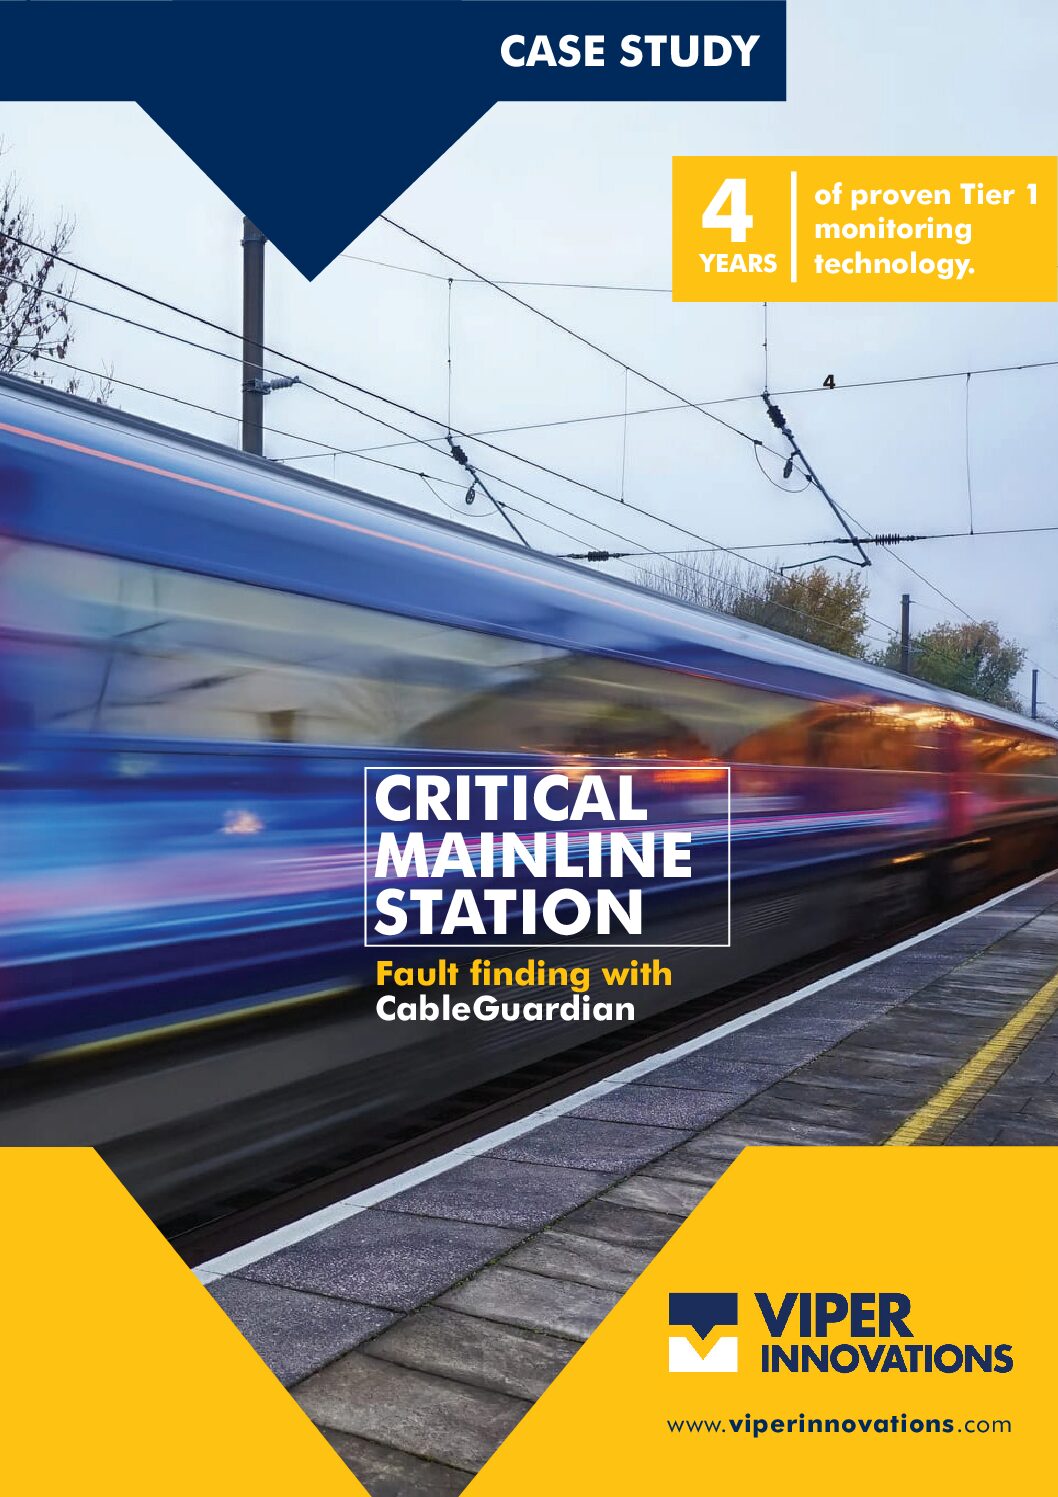 Critical Mainline Station – Fault Finding with CableGuardian